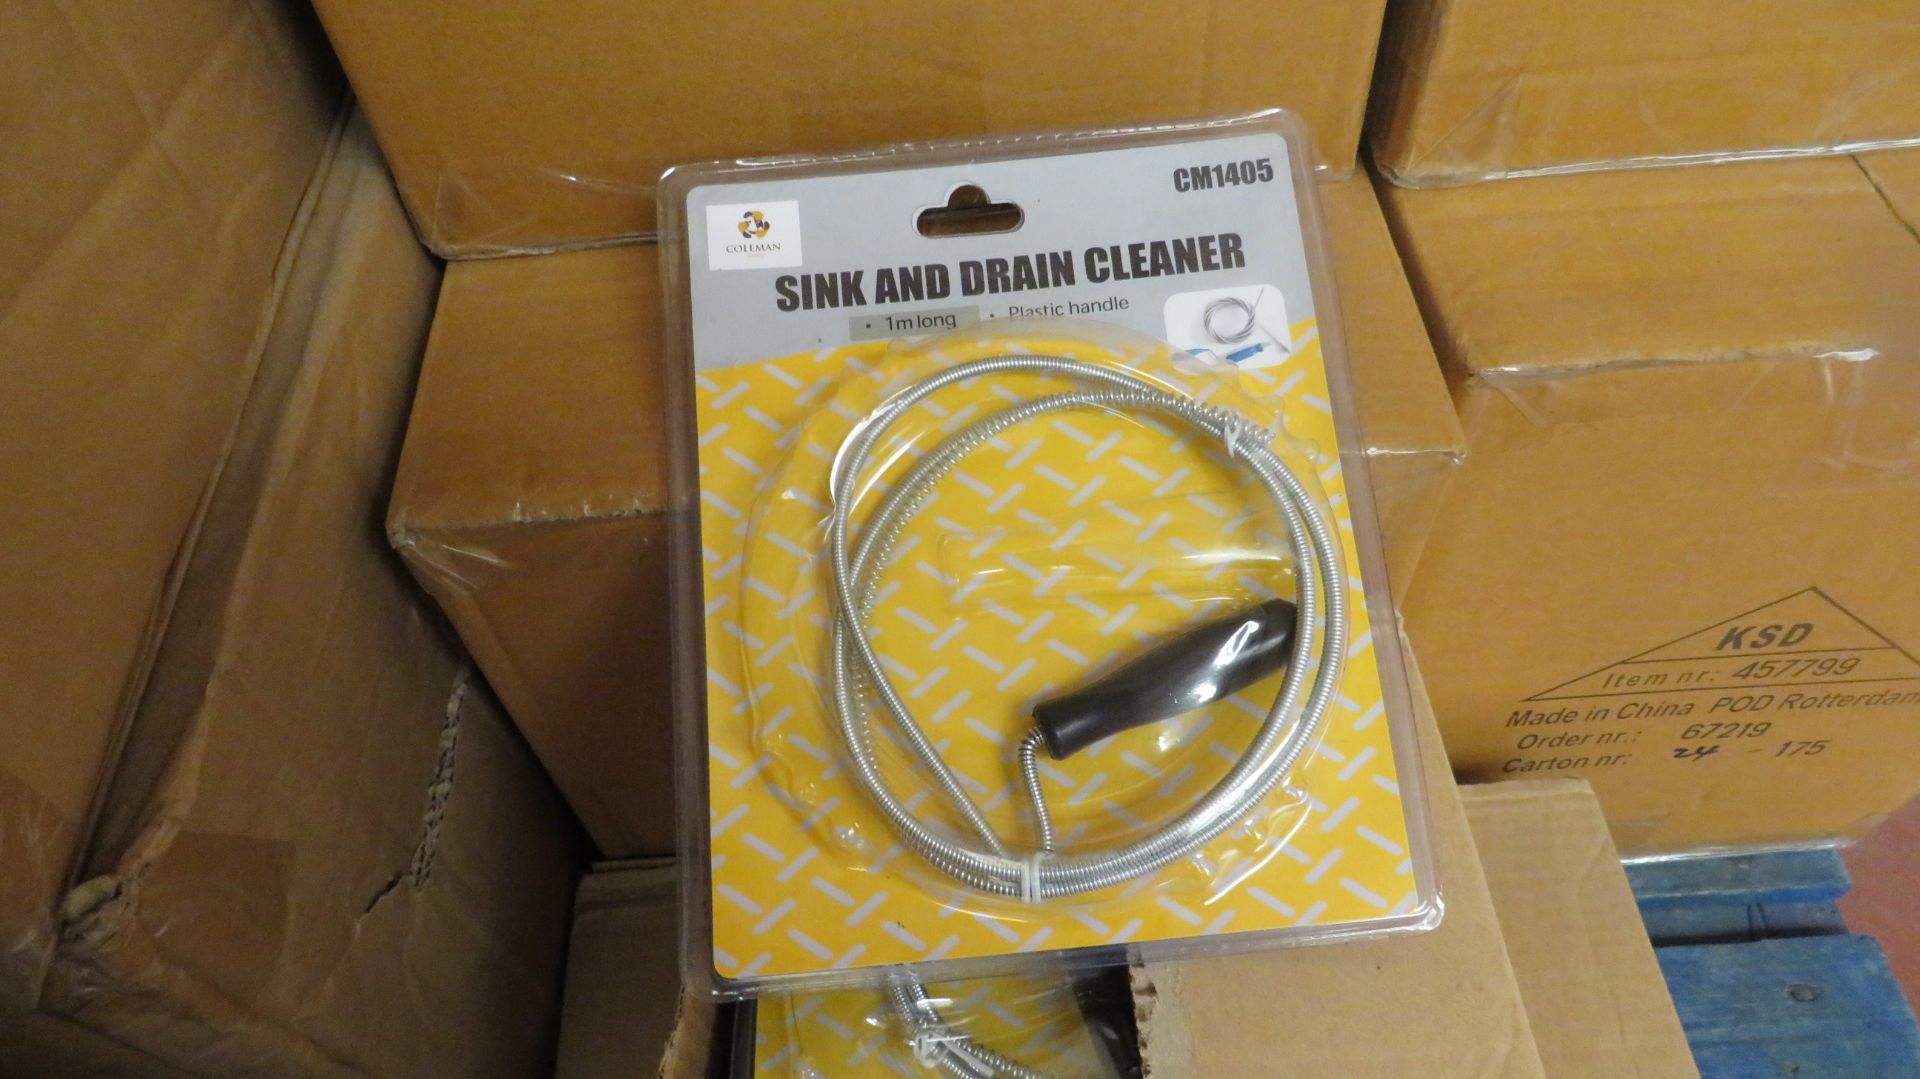 4x Coleman Sinc & Drain Cleaner, 1m Long - New & Packaged.